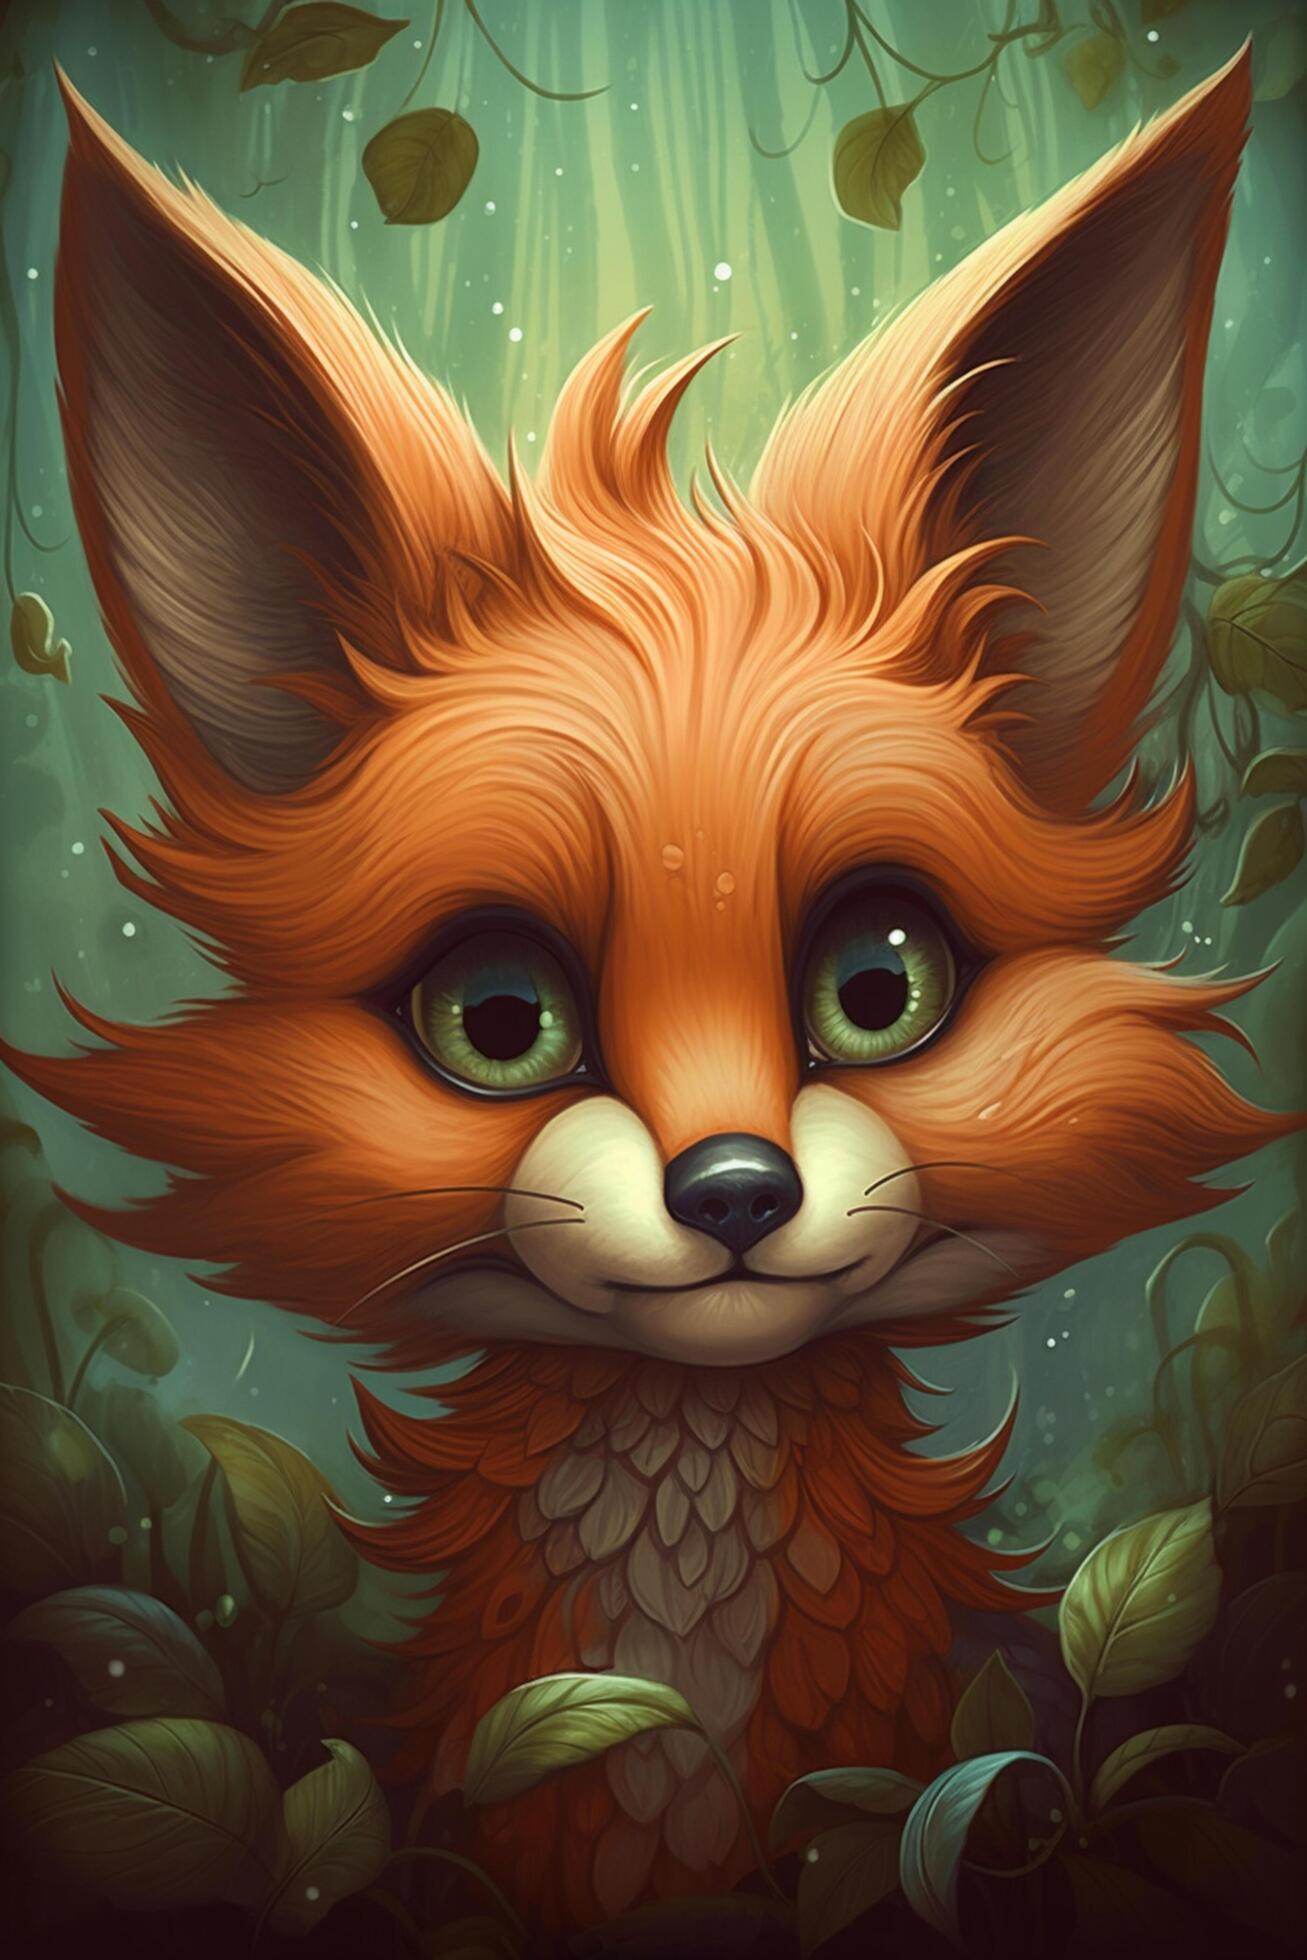 https://static.vecteezy.com/system/resources/previews/024/061/521/large_2x/enchanting-adventures-of-a-little-fox-in-a-magical-realm-a-comic-style-digital-painting-with-vivid-contrasting-colors-ai-generated-free-photo.jpg